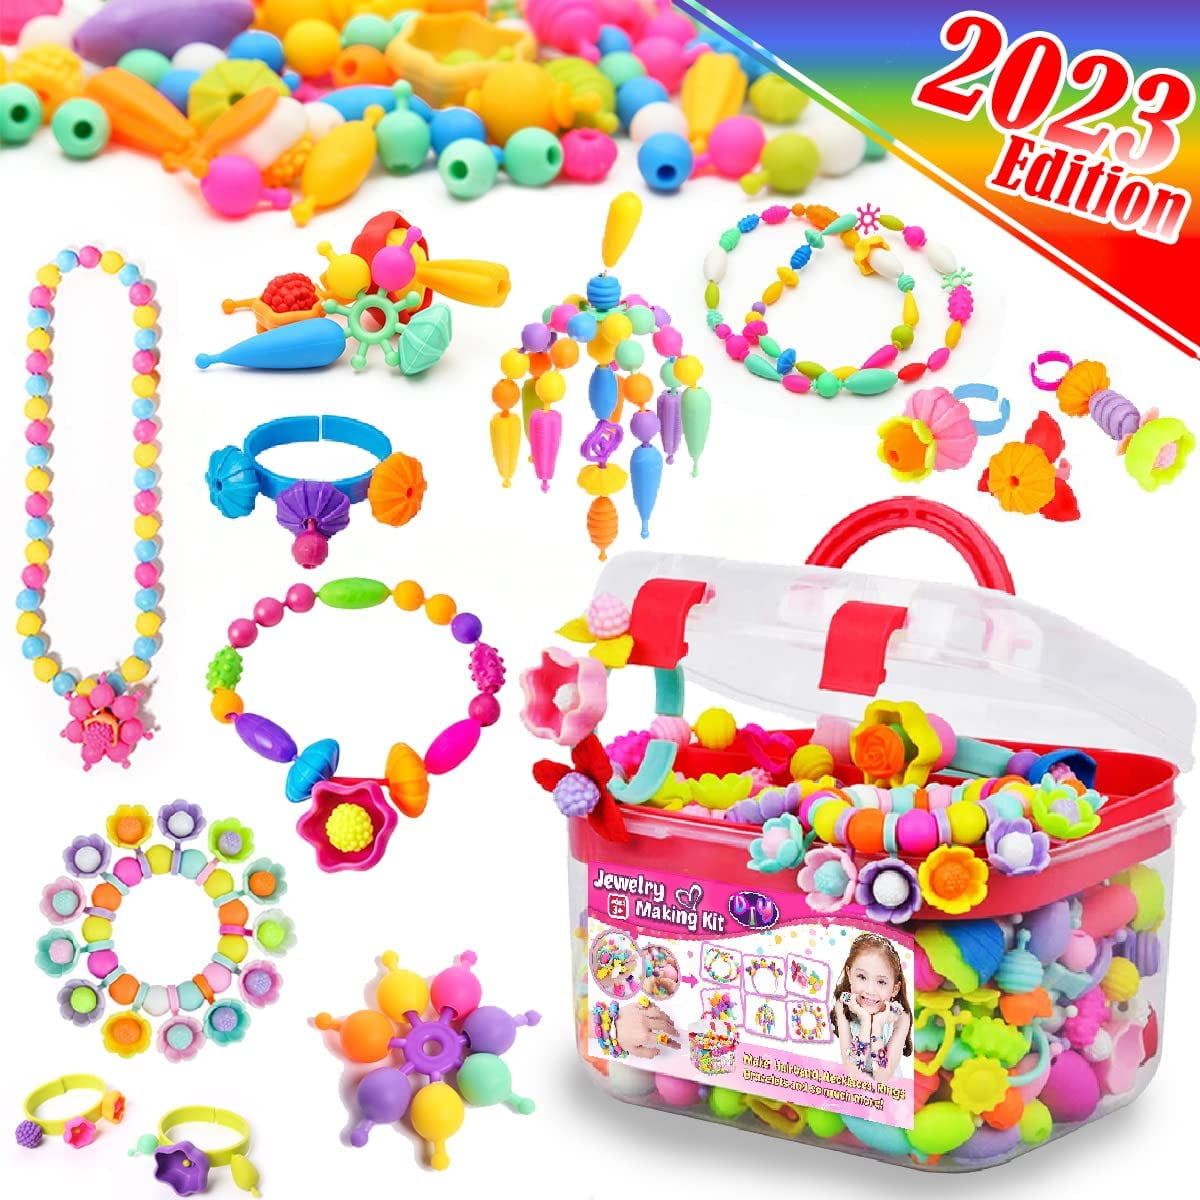 FUNZBO Kids Jewelry Making Kit for Girls Toys - Snap Pop Beads Pop-Bead Art and Craft Kits DIY Bracelets Necklace Hairband and Rings Toy for Age 3 4